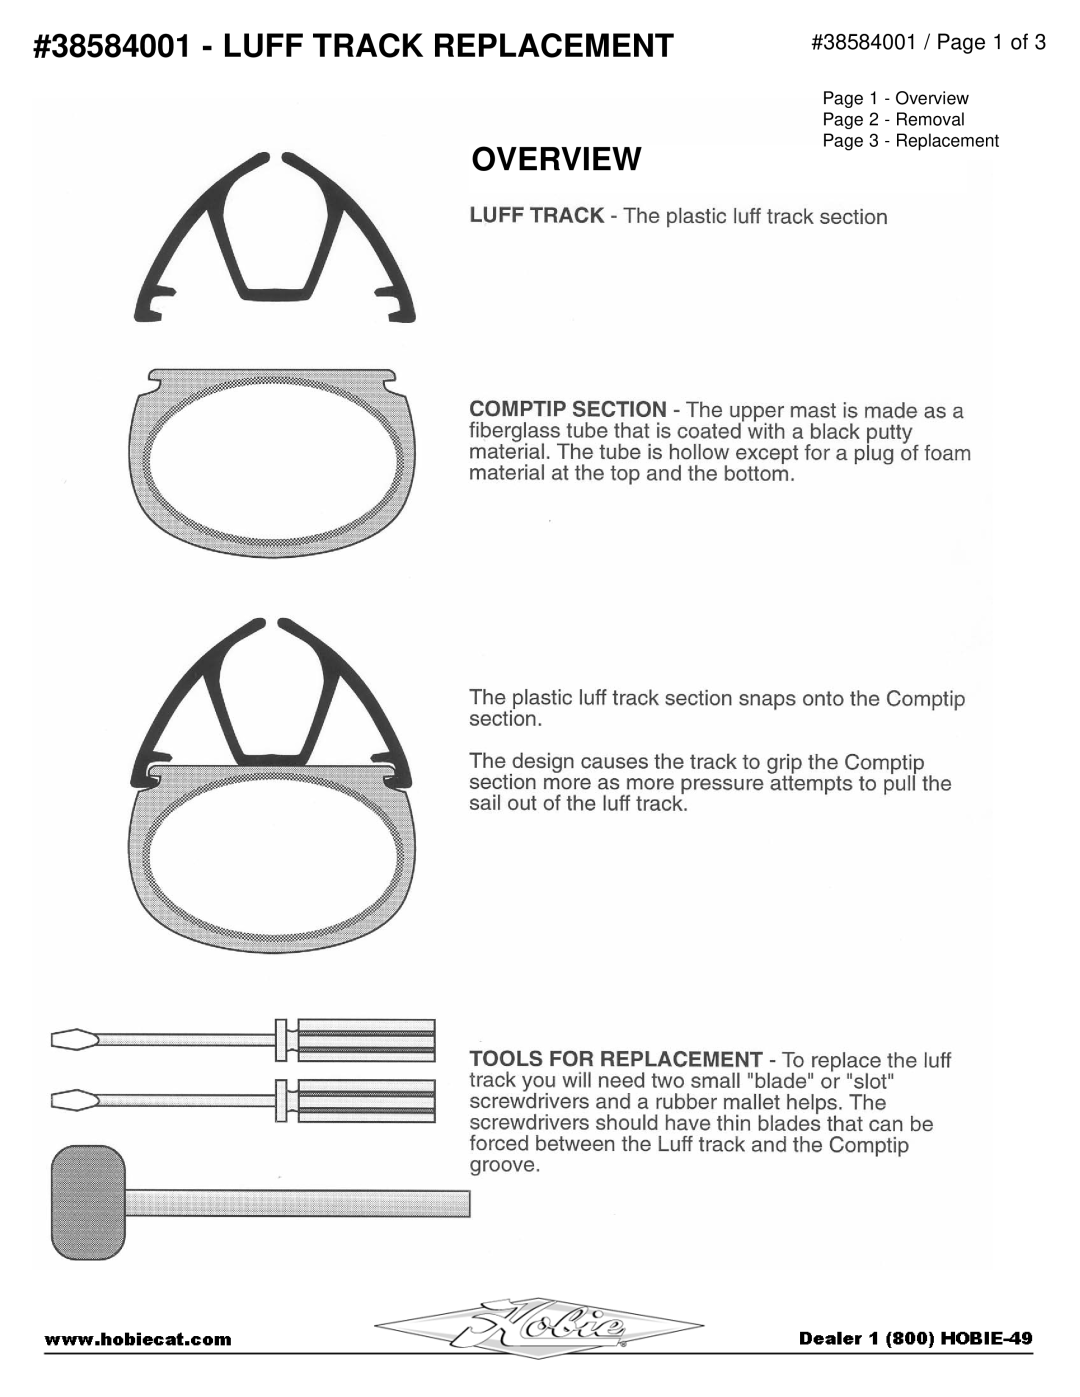 Hobie manual #38584001 - LUFF TRACK REPLACEMENT OVERVIEW, Page 1 - Overview Page 2 - Removal Page 3 - Replacement 